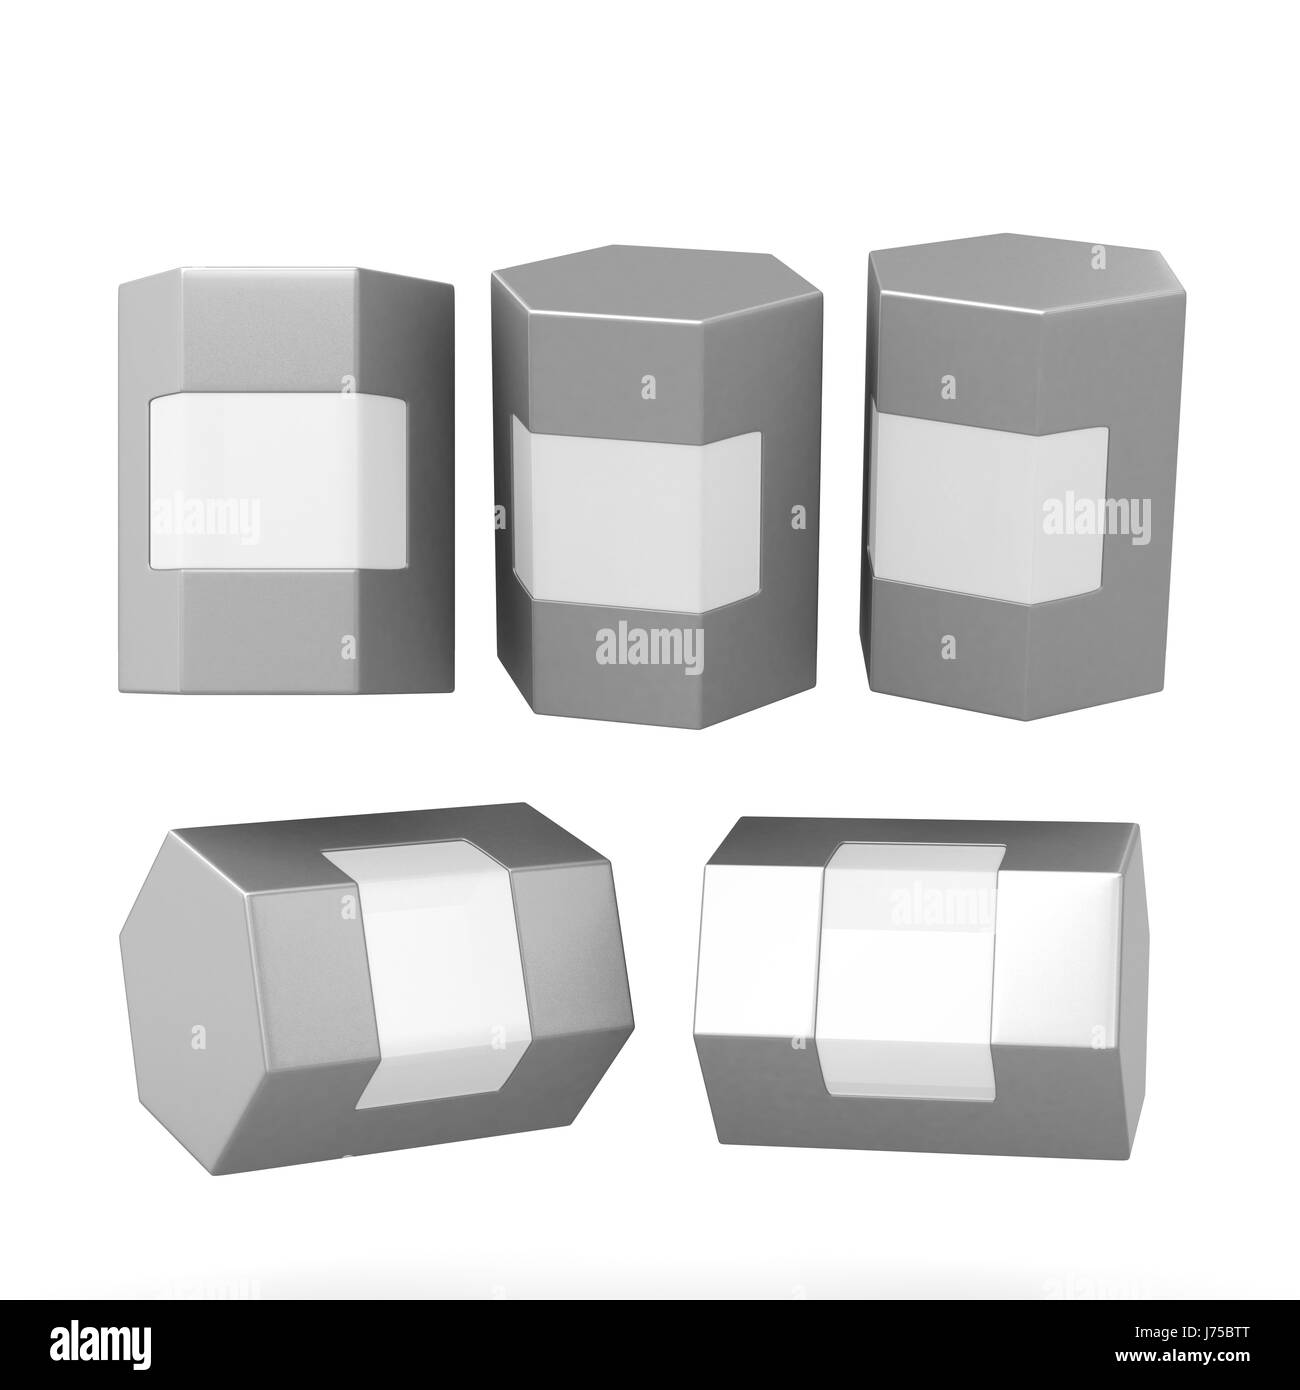 Download Silver Hexagon Box Packaging With Clipping Path Mock Up Packaging For All Kind Of Product Ready For Your Design Stock Photo Alamy